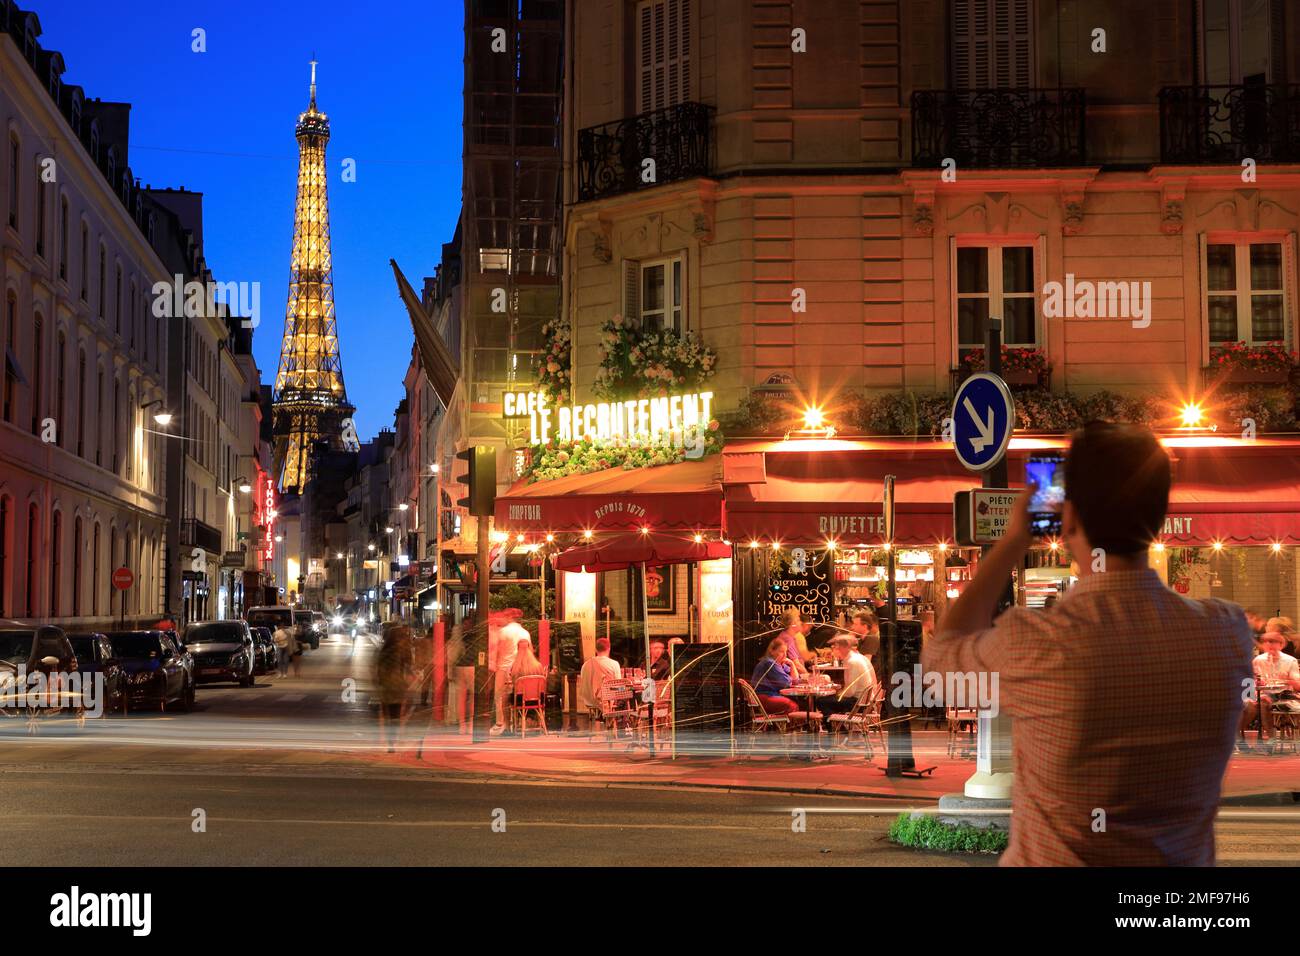 Night view of Eiffel Tower and Cafe Le Recrutement in the corner of Rue ...